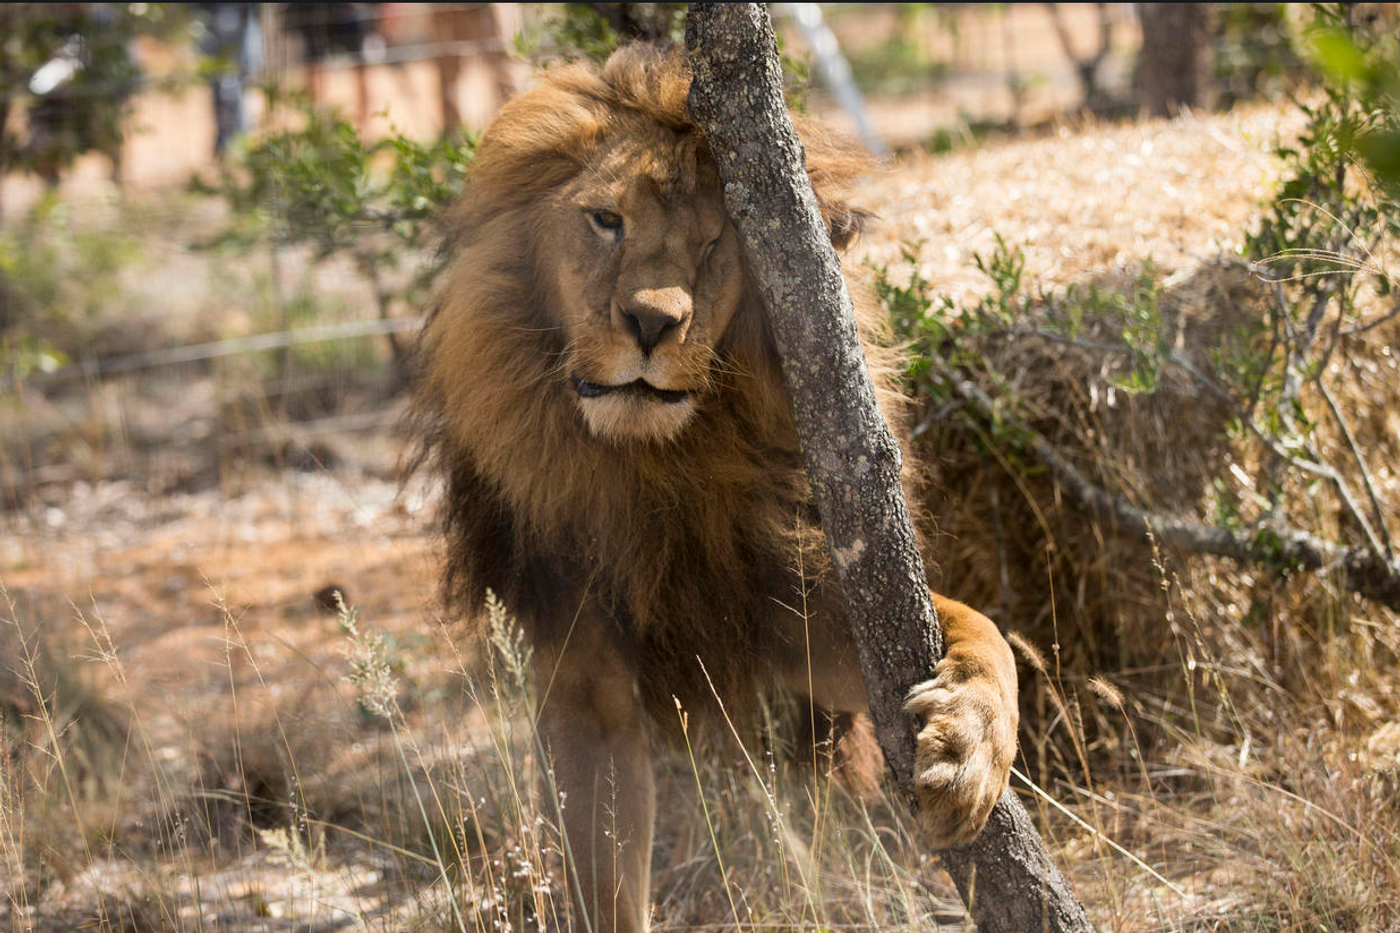 A lion at the animal sanctuary.